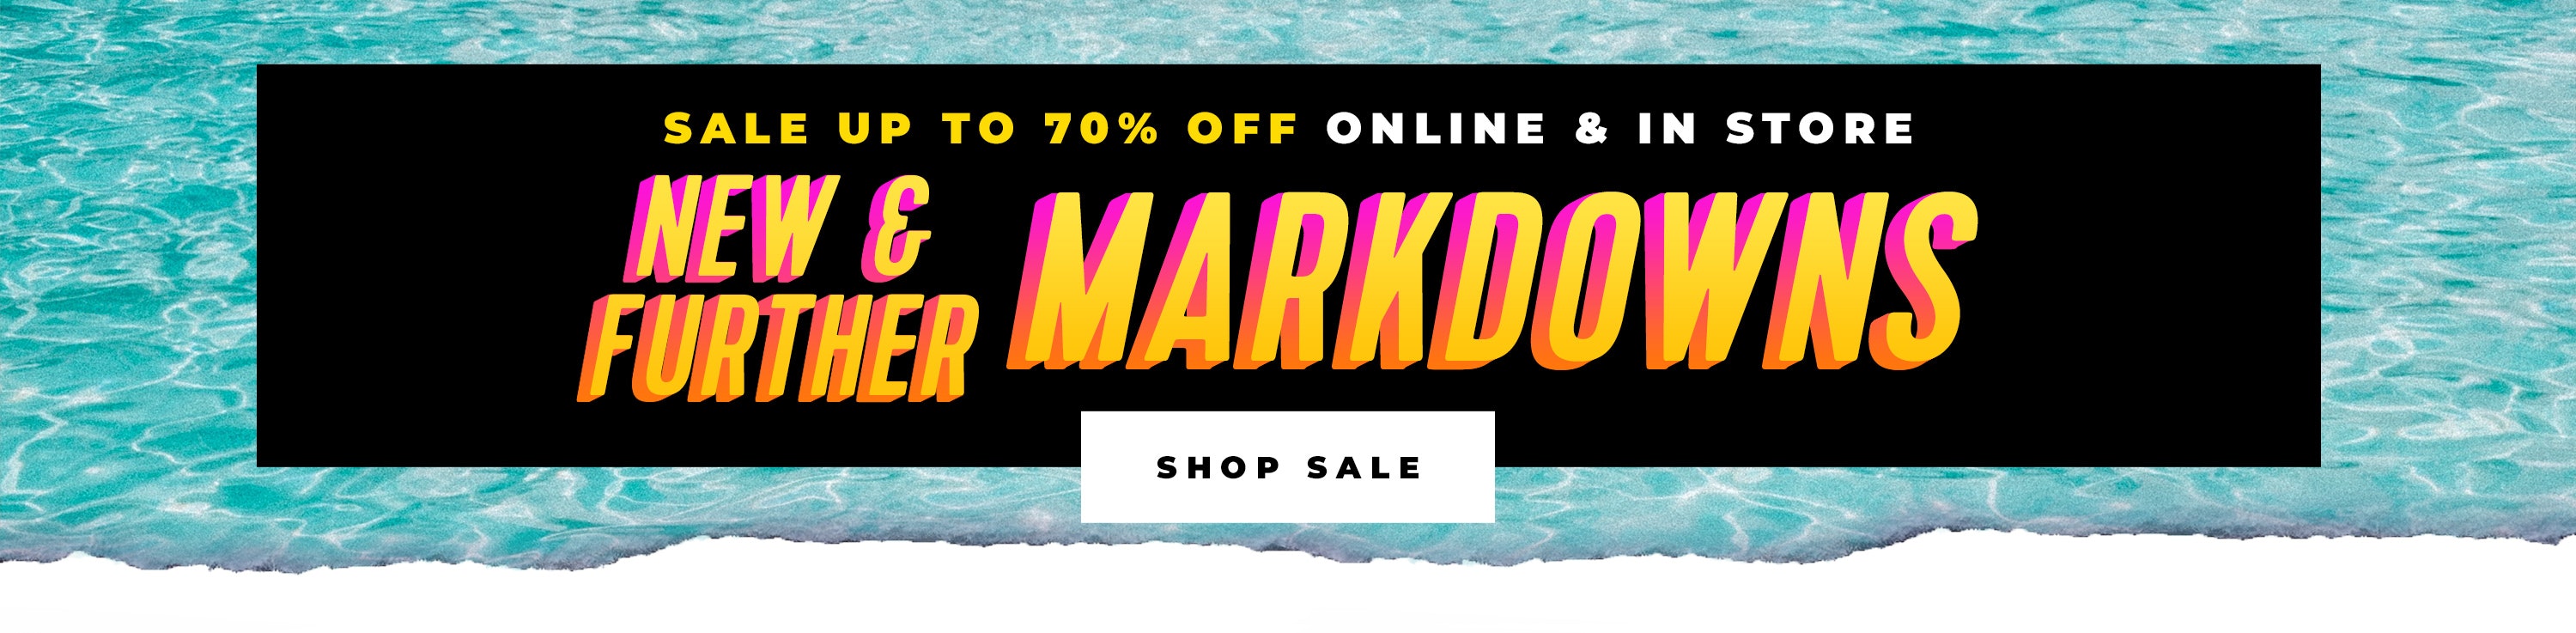 Sale up to 70% Off New & Further Markdowns